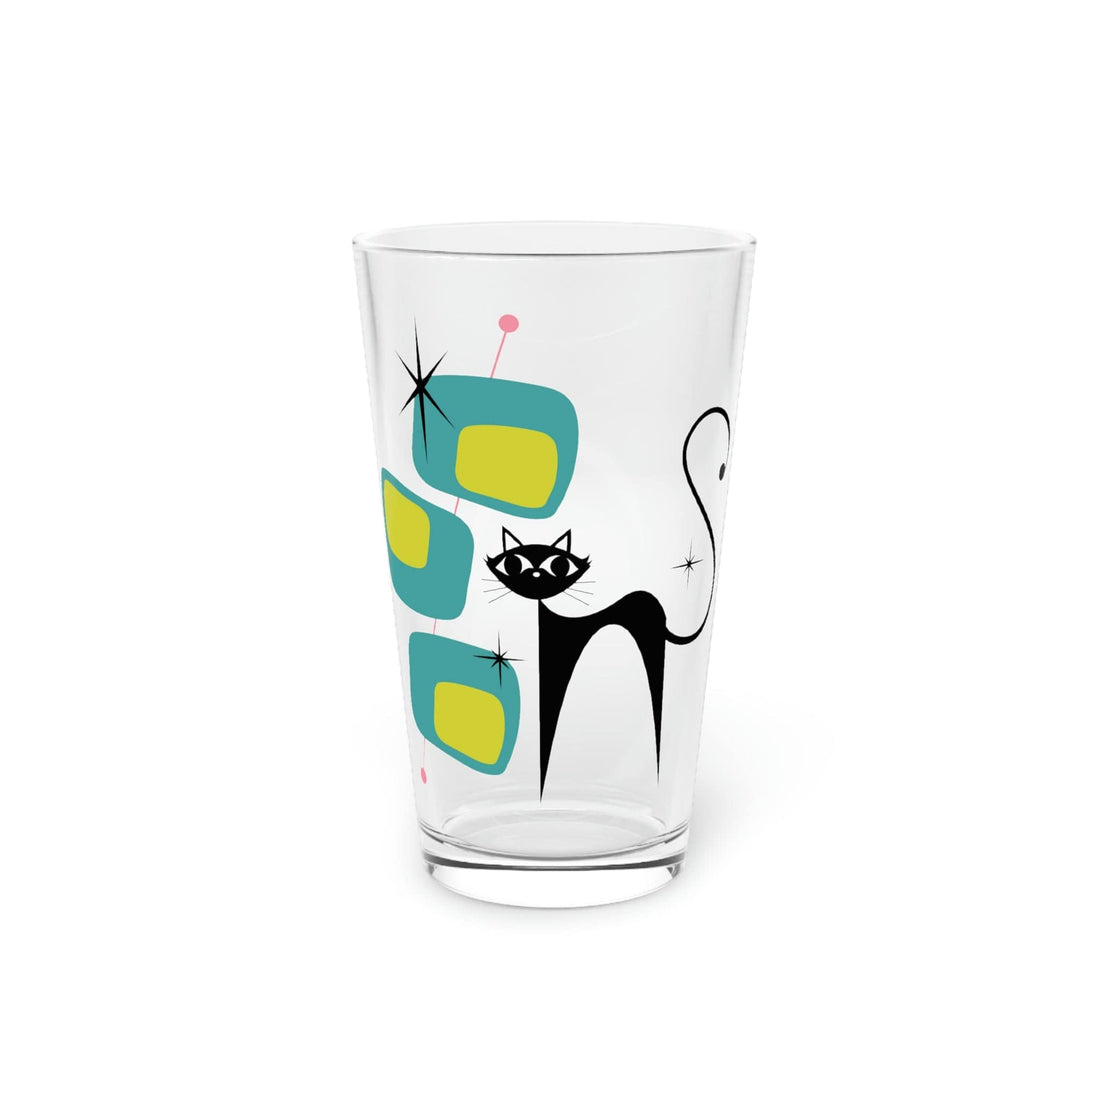 Kate McEnroe New York Atomic Cat Retro Kitsch Pint Glass, 16oz Mid Century Modern Beer Glass, MCM Glass, Beer Glassware Gifts, Party Drinkware, Cocktail Glass Beer Glasses 16oz 21482491883001381578